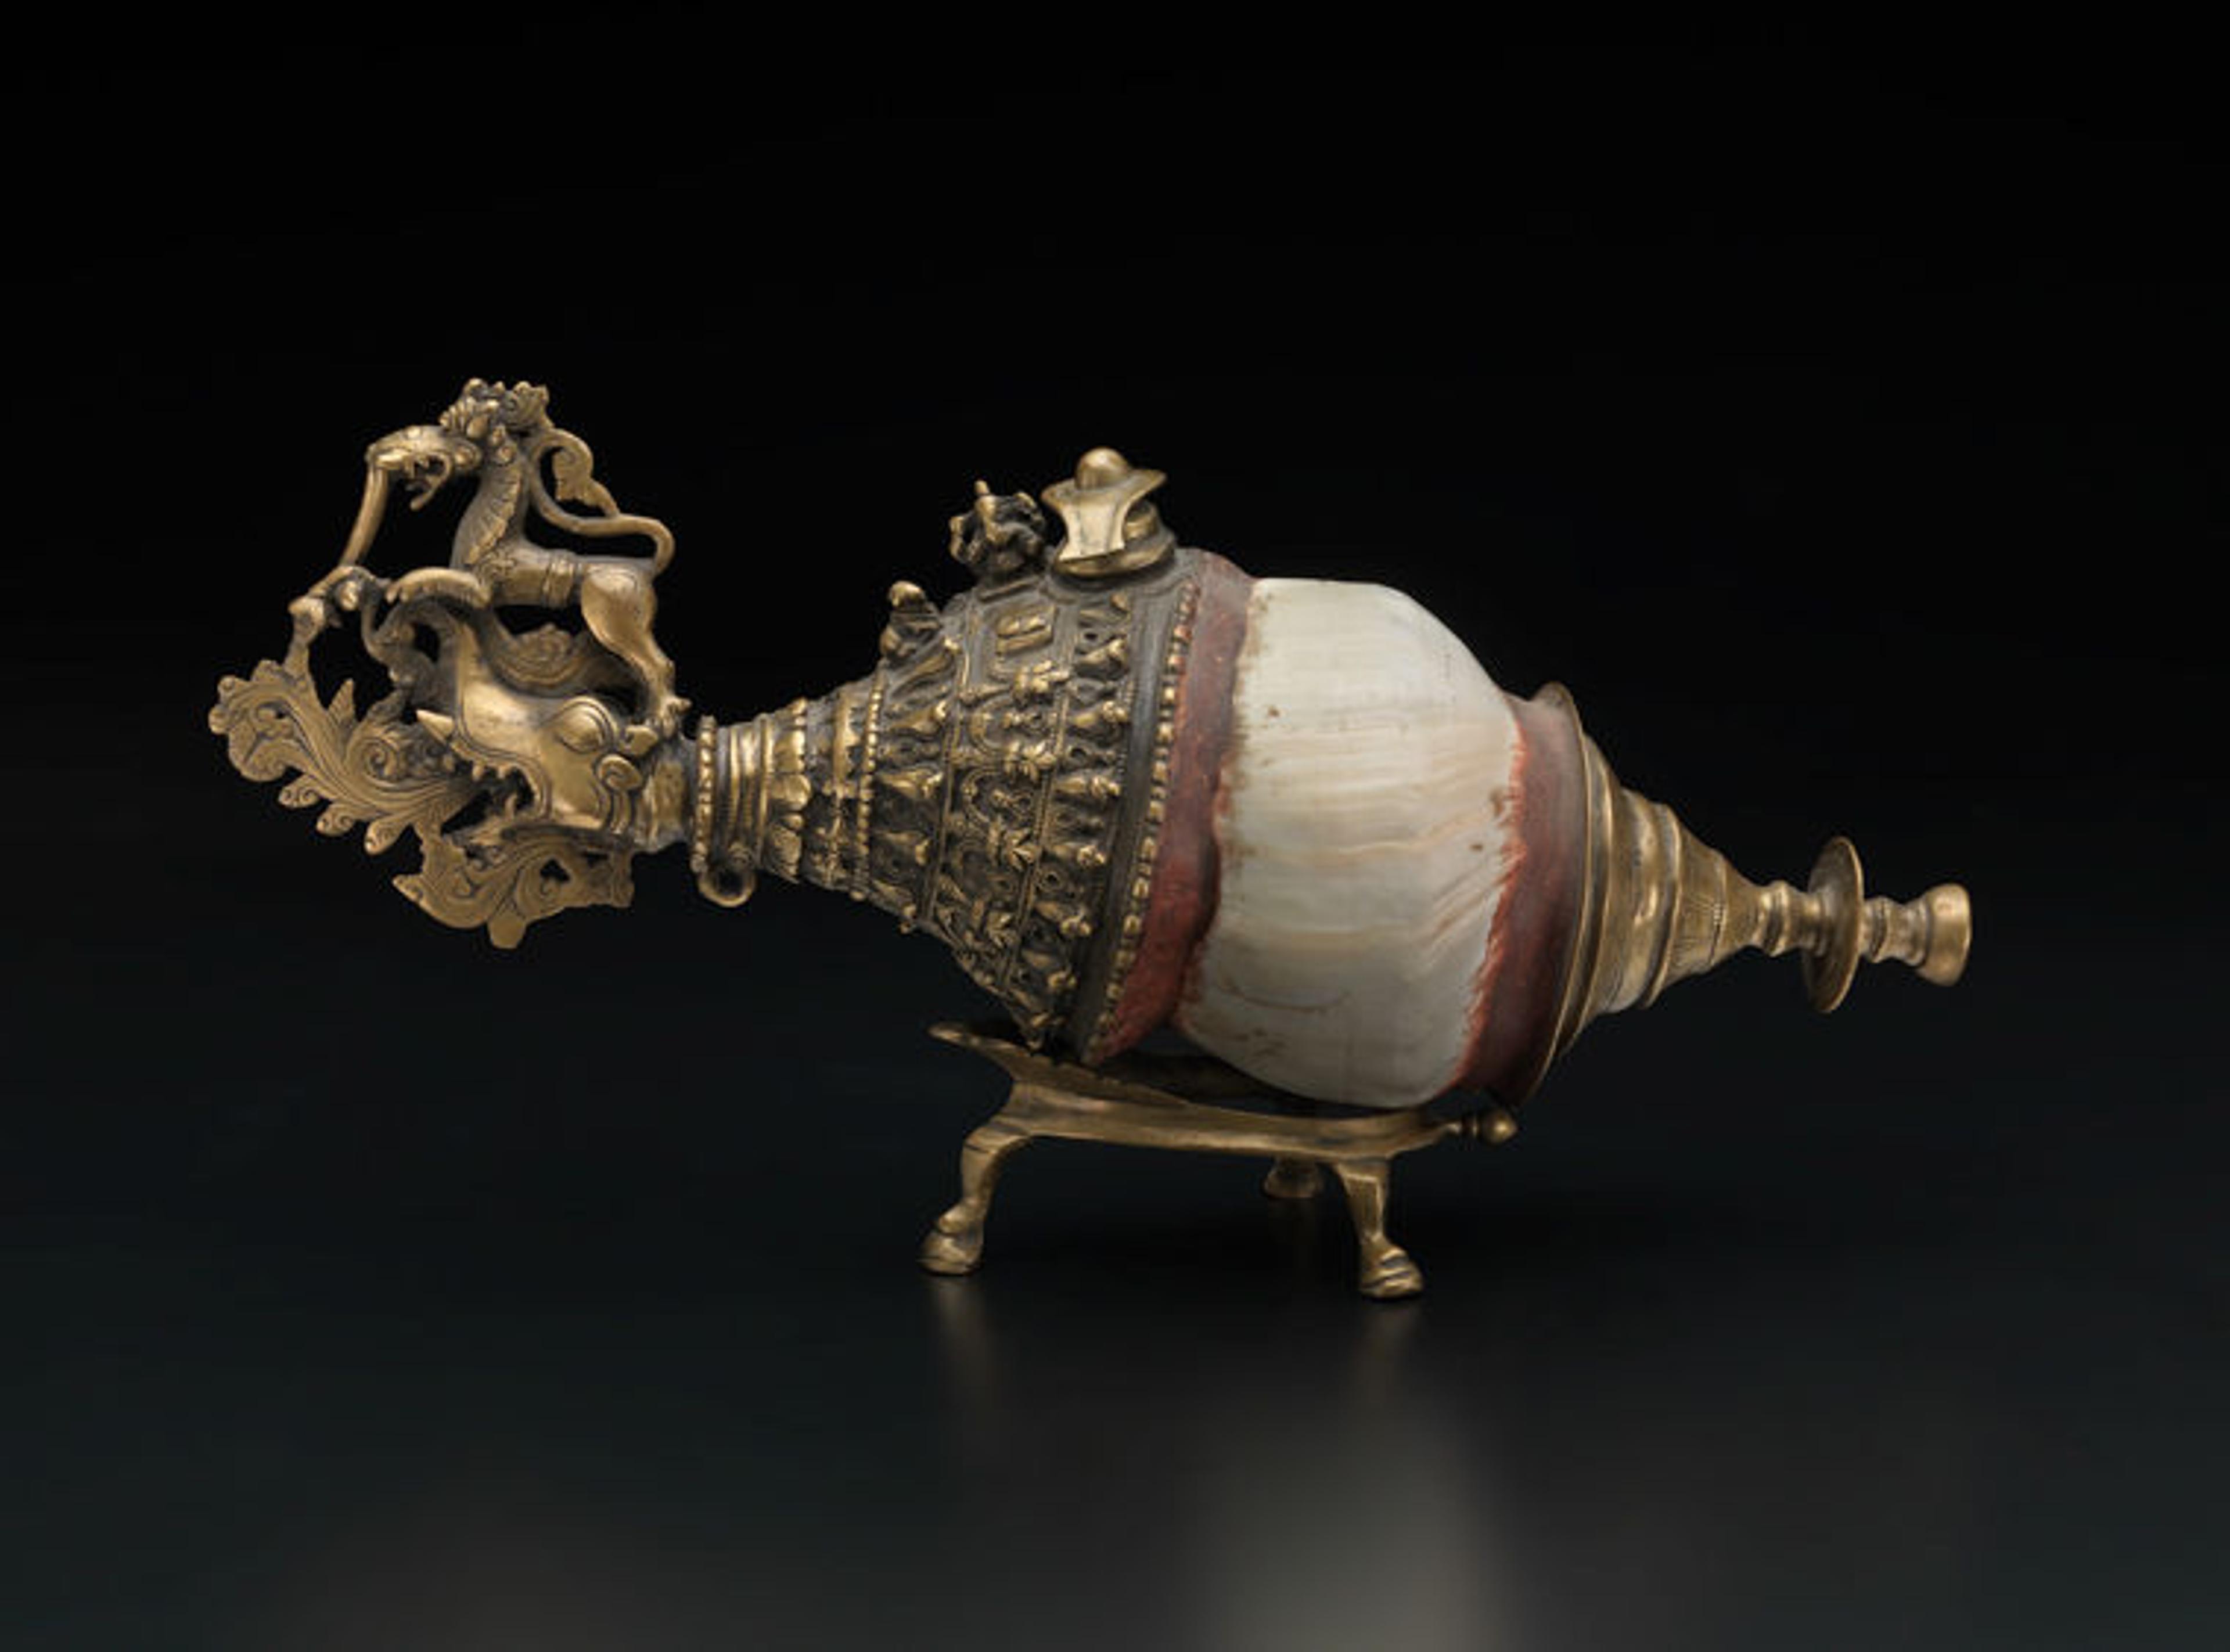 An elaborate Indian sankh (conch trumpet) featuring brass work and placed on a brass stand